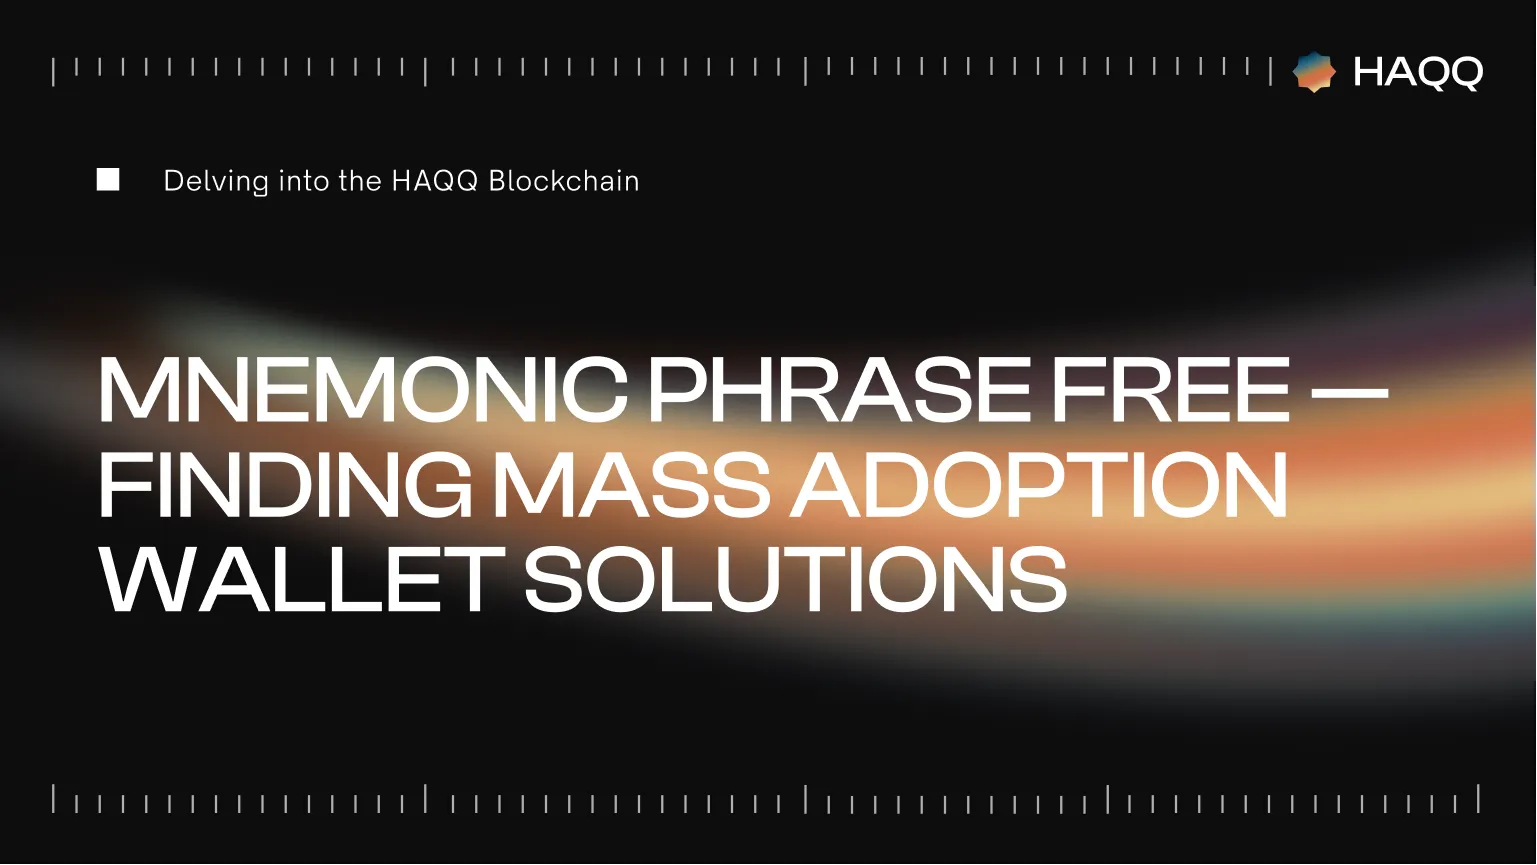 Mnemonic phrase free — Finding Mass Adoption Wallet Solutions